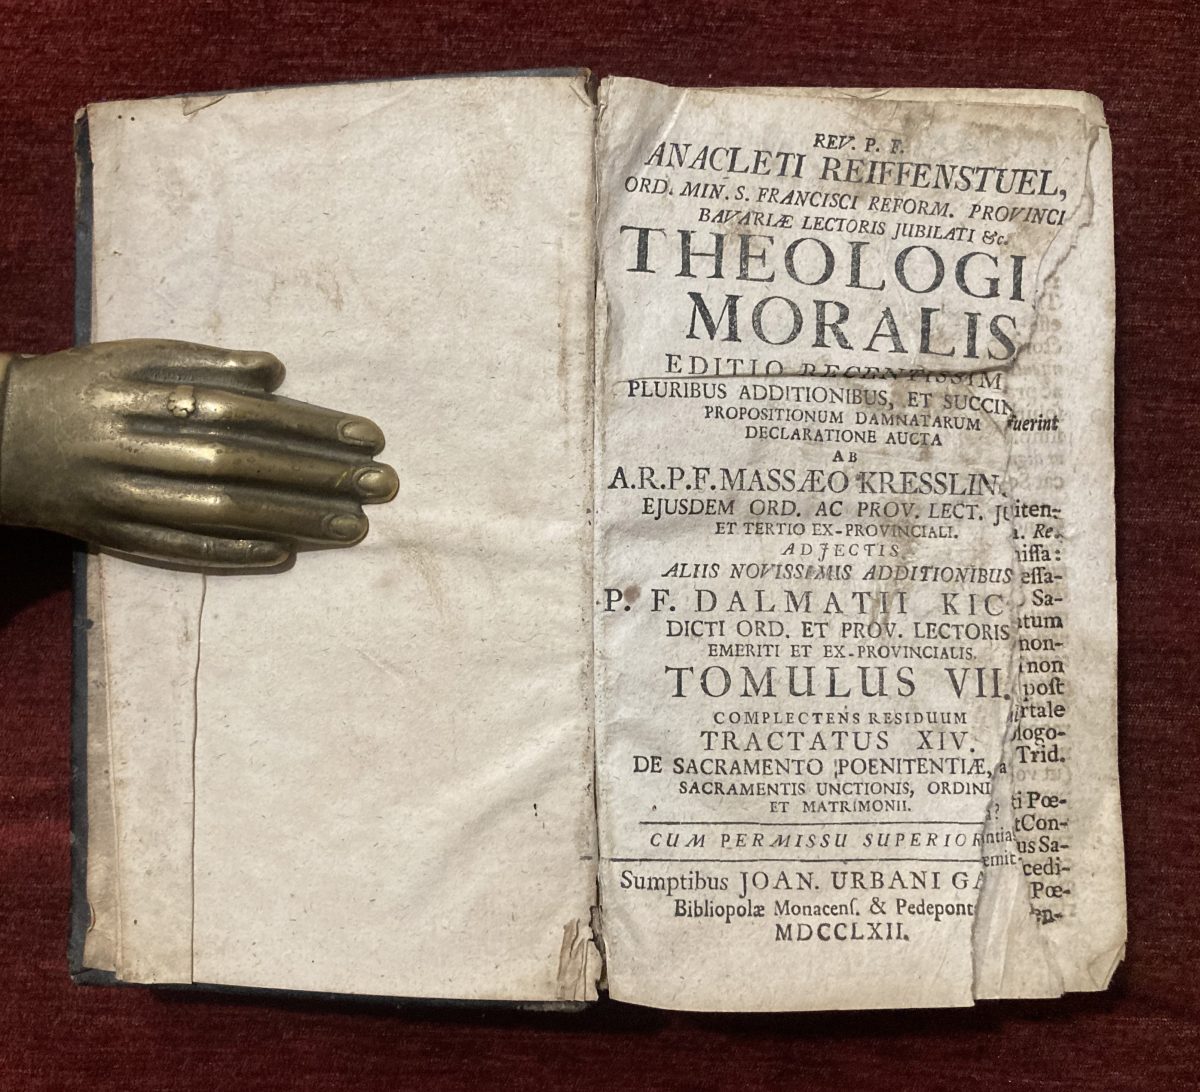 Theologia Moralis title page